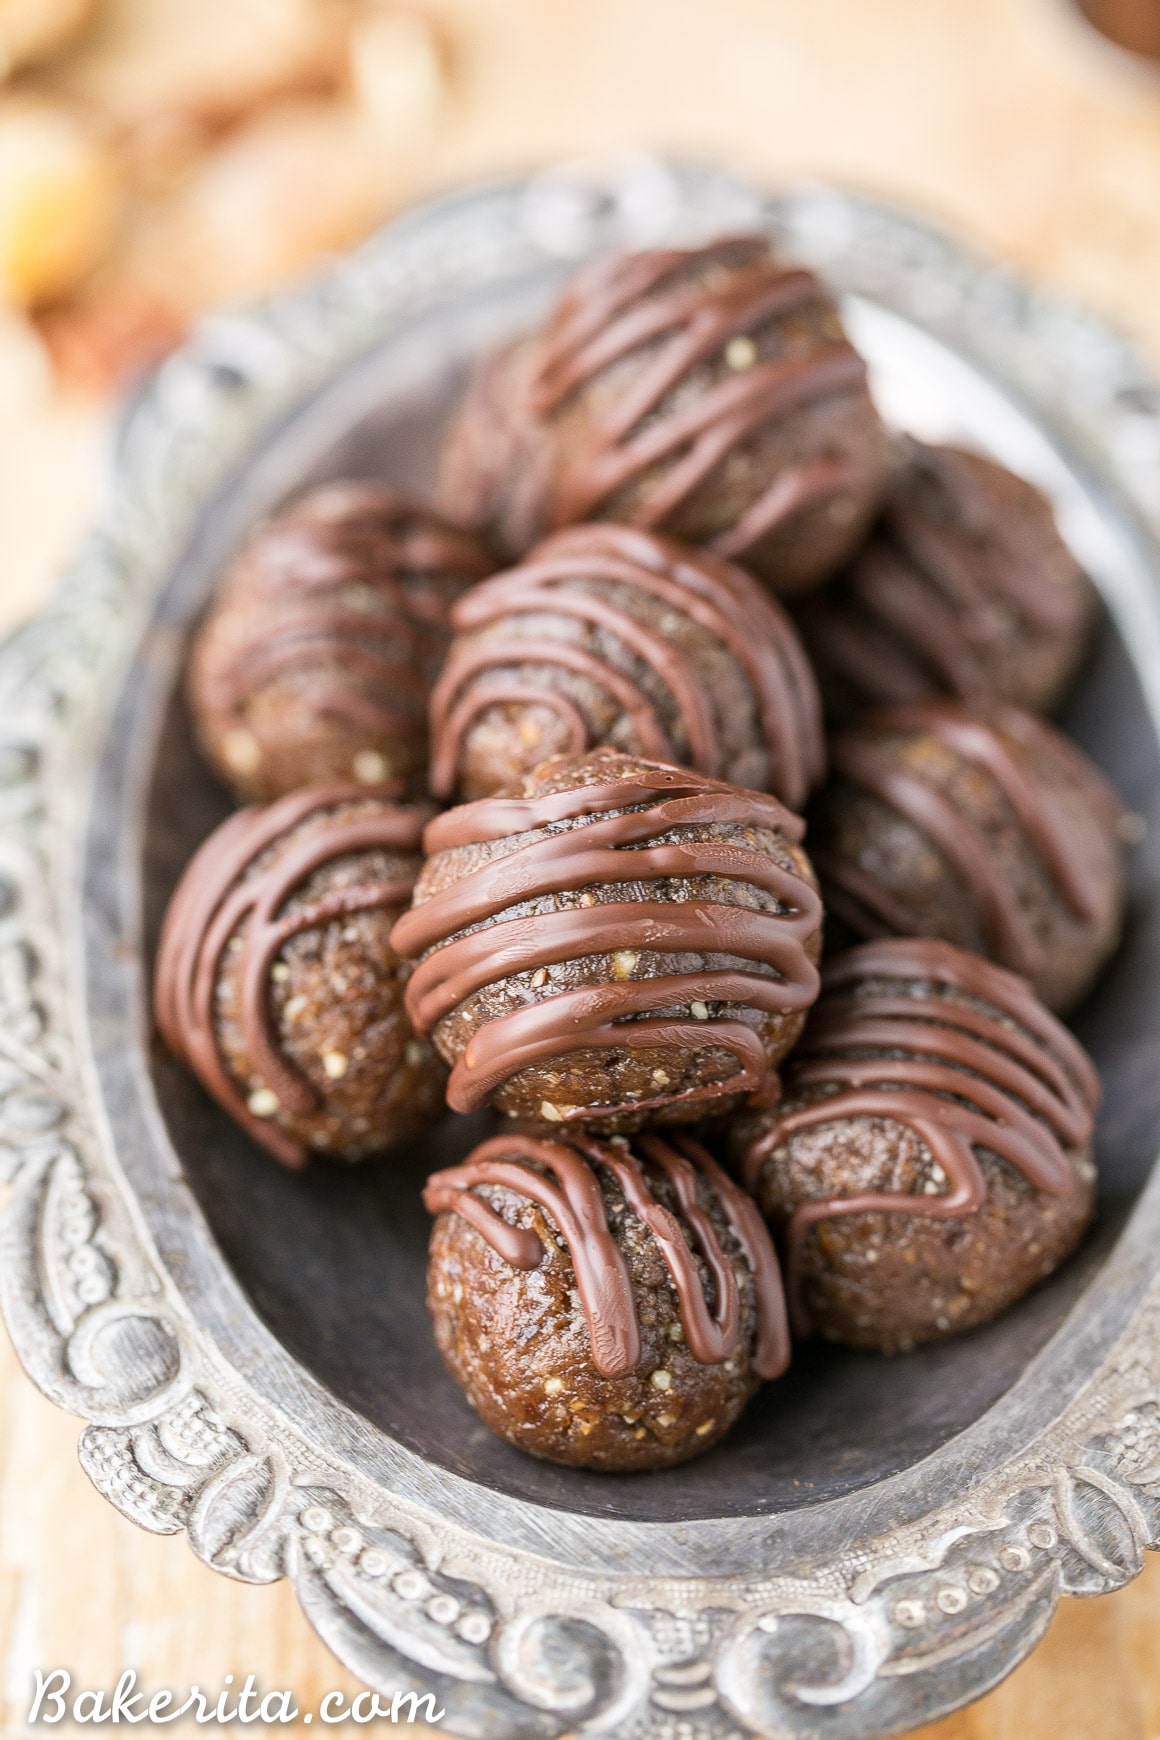 No baking required to make these Gingerbread Energy Bites! These gluten-free, Paleo + vegan energy bites are made with dates, pecans, and gingerbread spices - they're the perfect healthy snack to fuel your day.